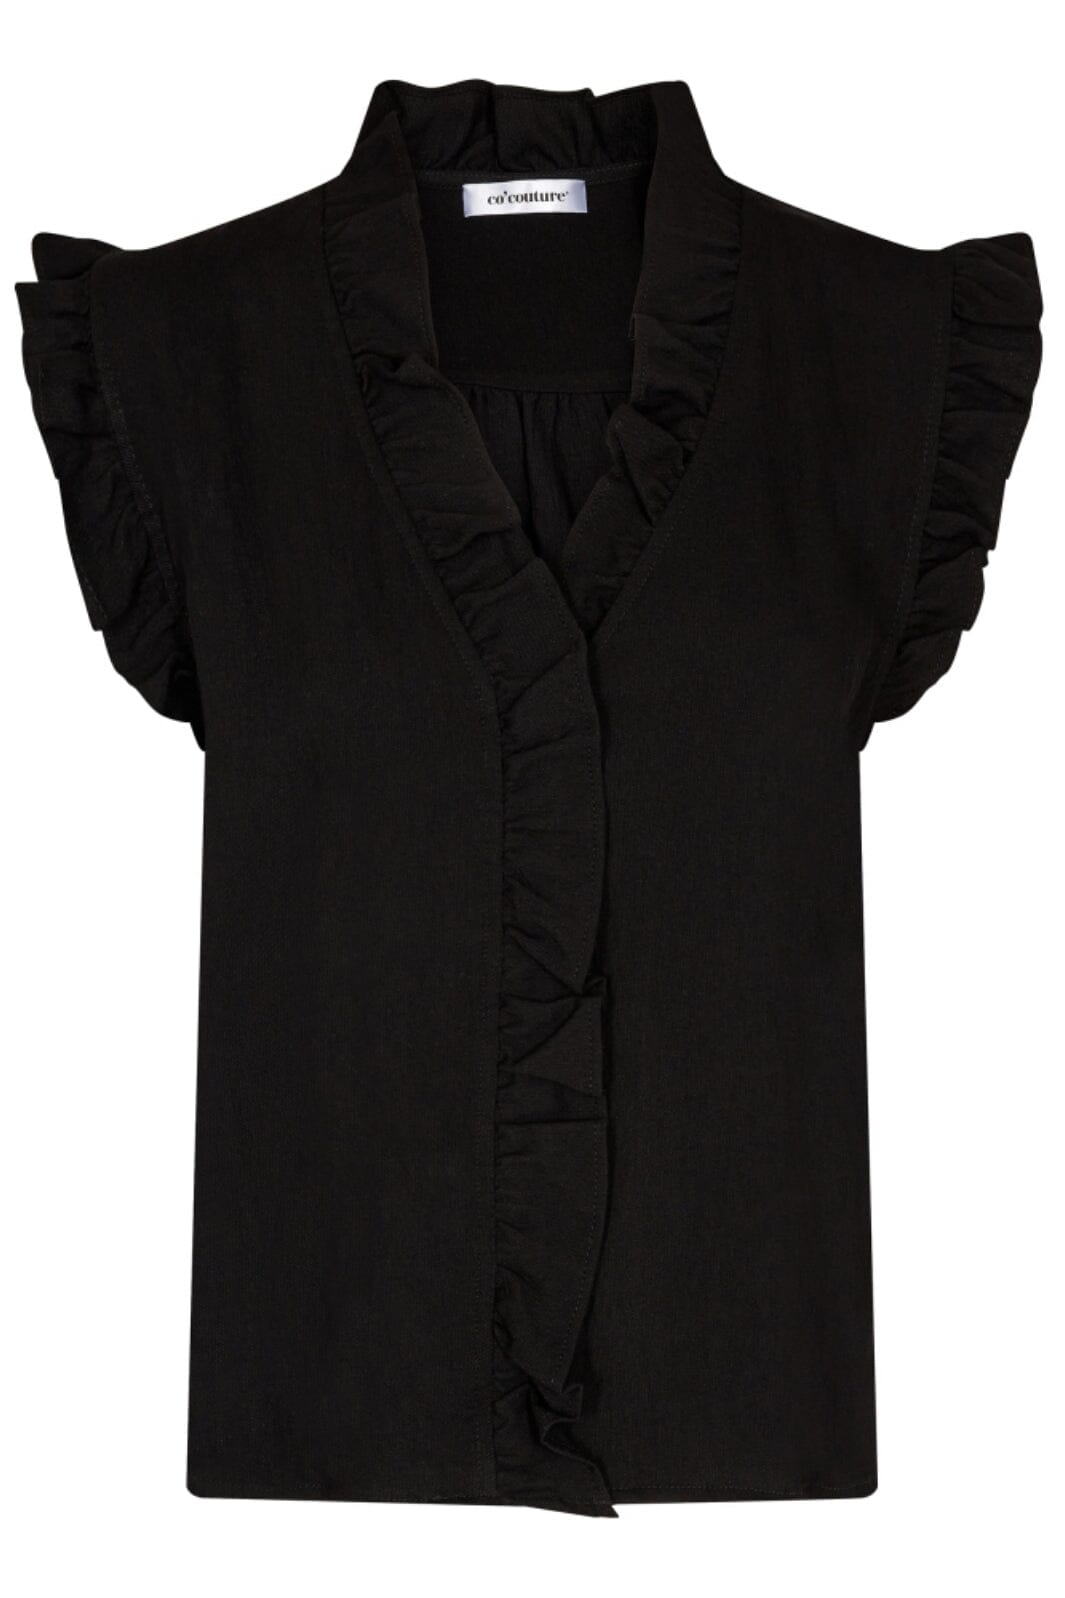 Co´couture - Suedacc Frill Top 35213 - 96 Black Skjorter 